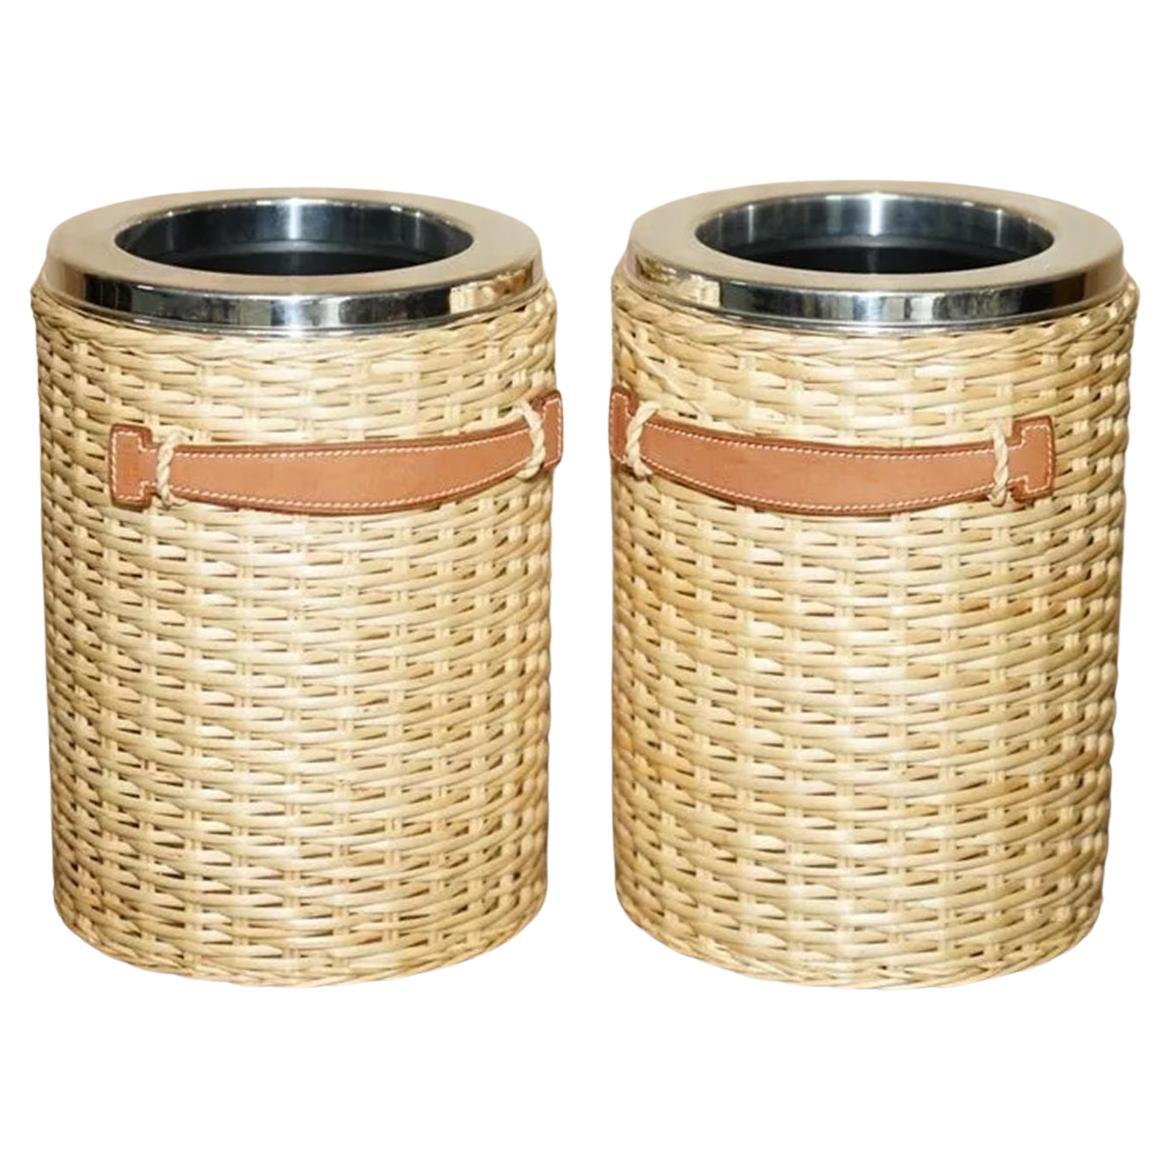 PAIR OF HERMES PARIS KELLY WICKER & BROWN LEATHER PICNIC WiNE COOLERS PART SUITE For Sale